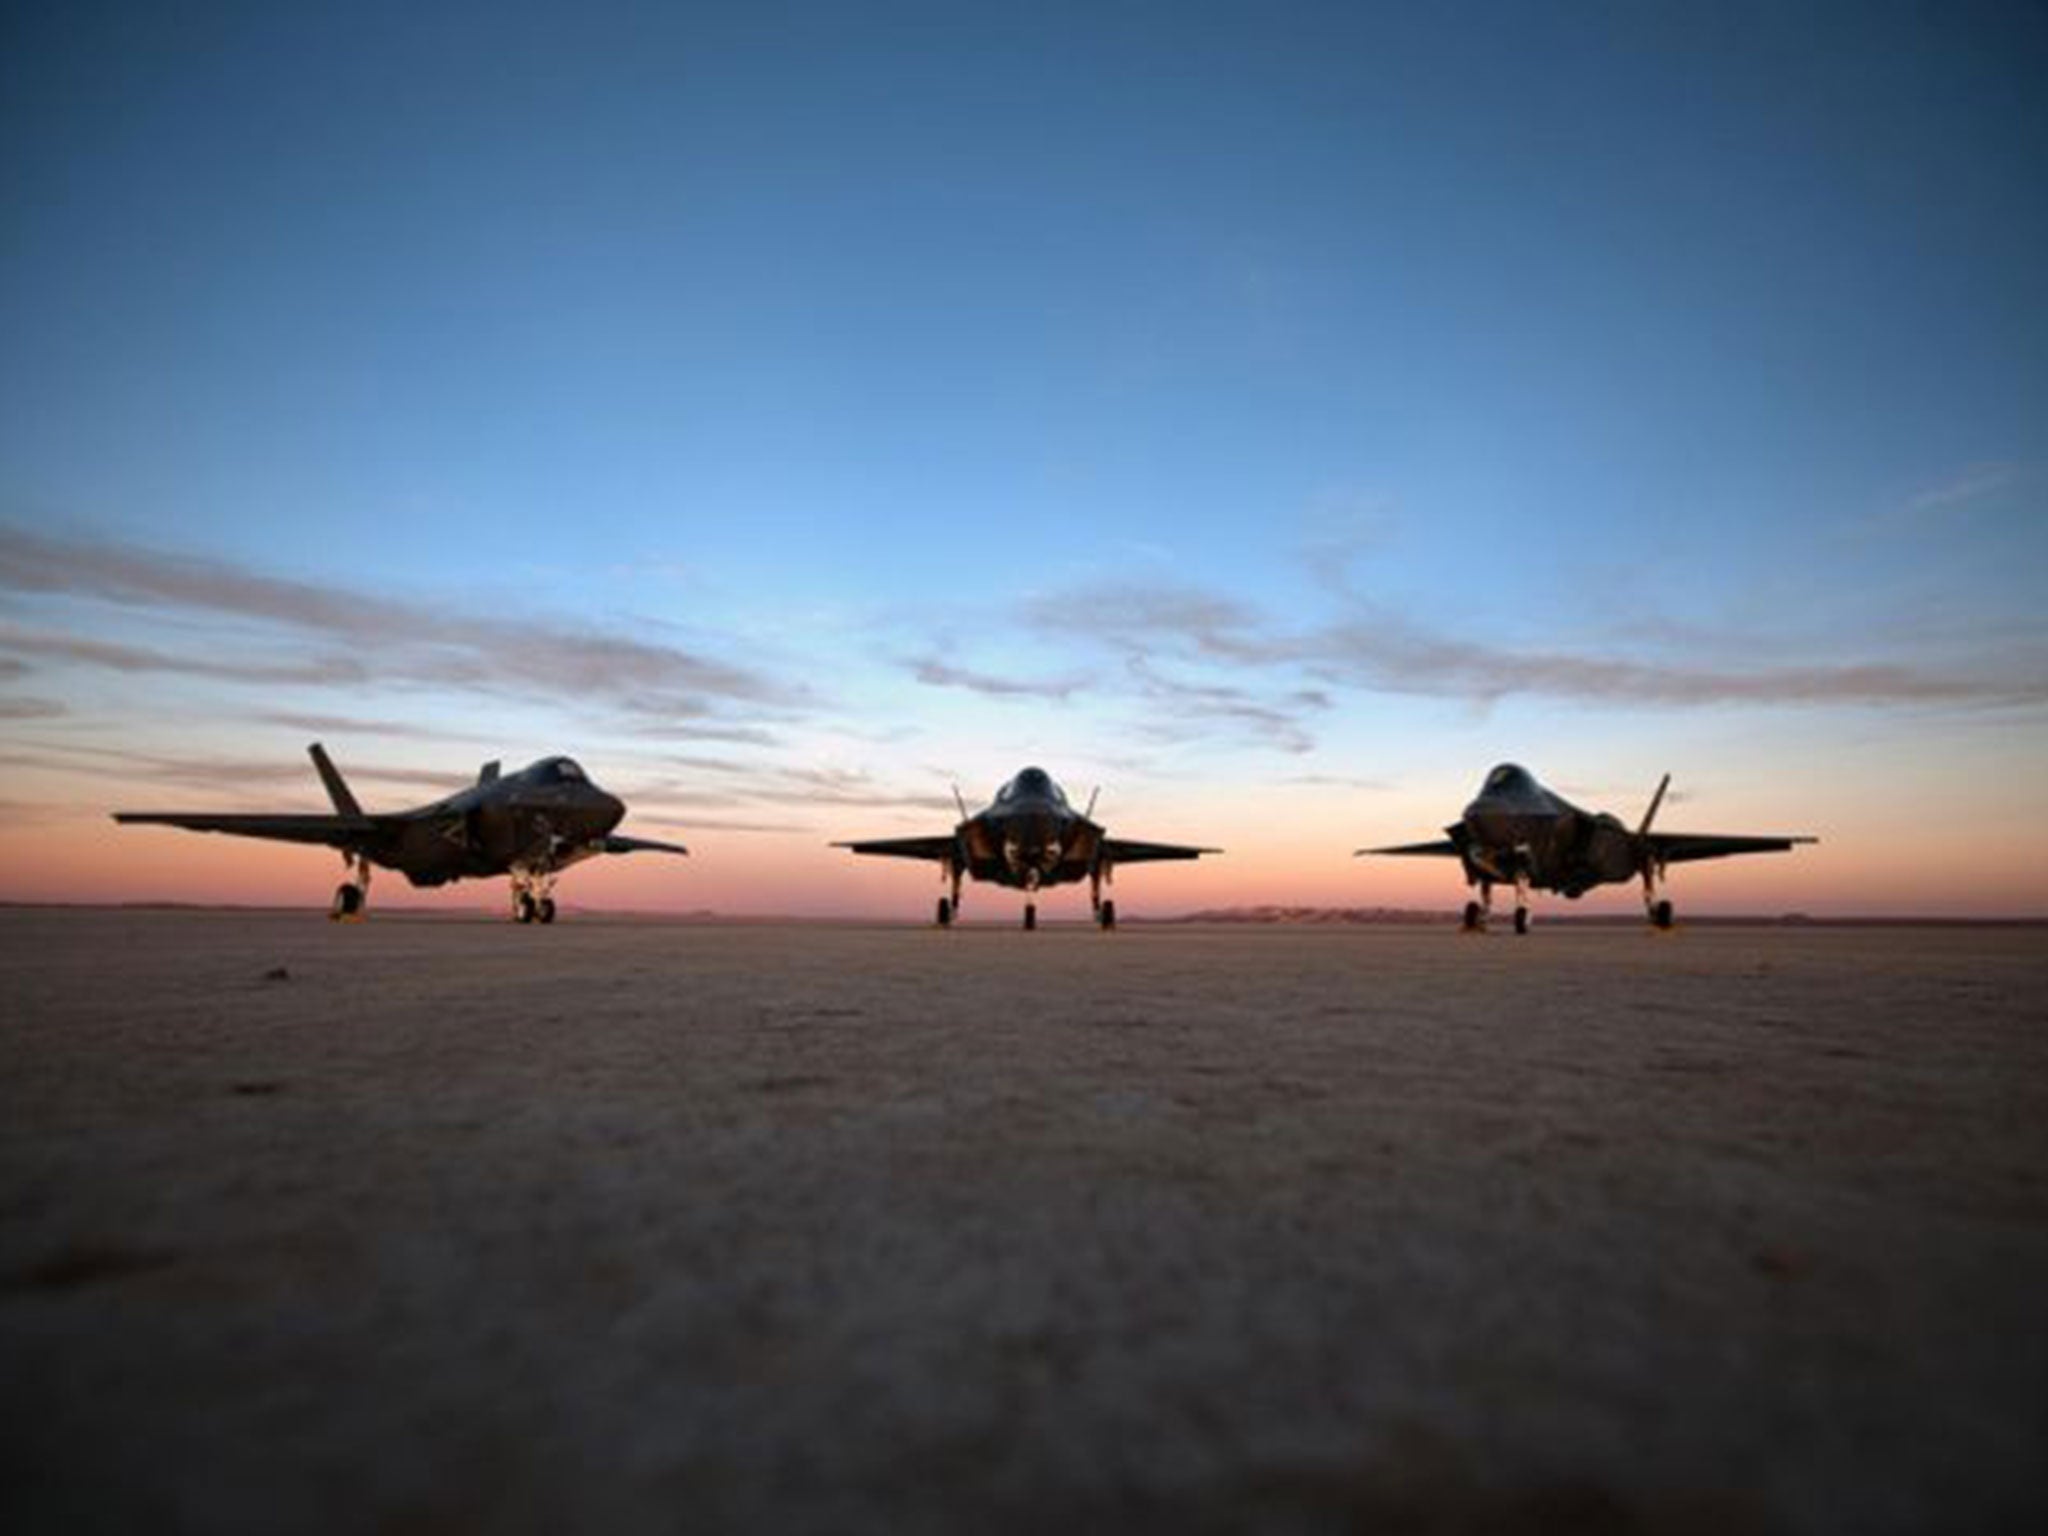 USA has contracts to supply a total of 611 of its new generation F-35 combat aircraft to nine countries